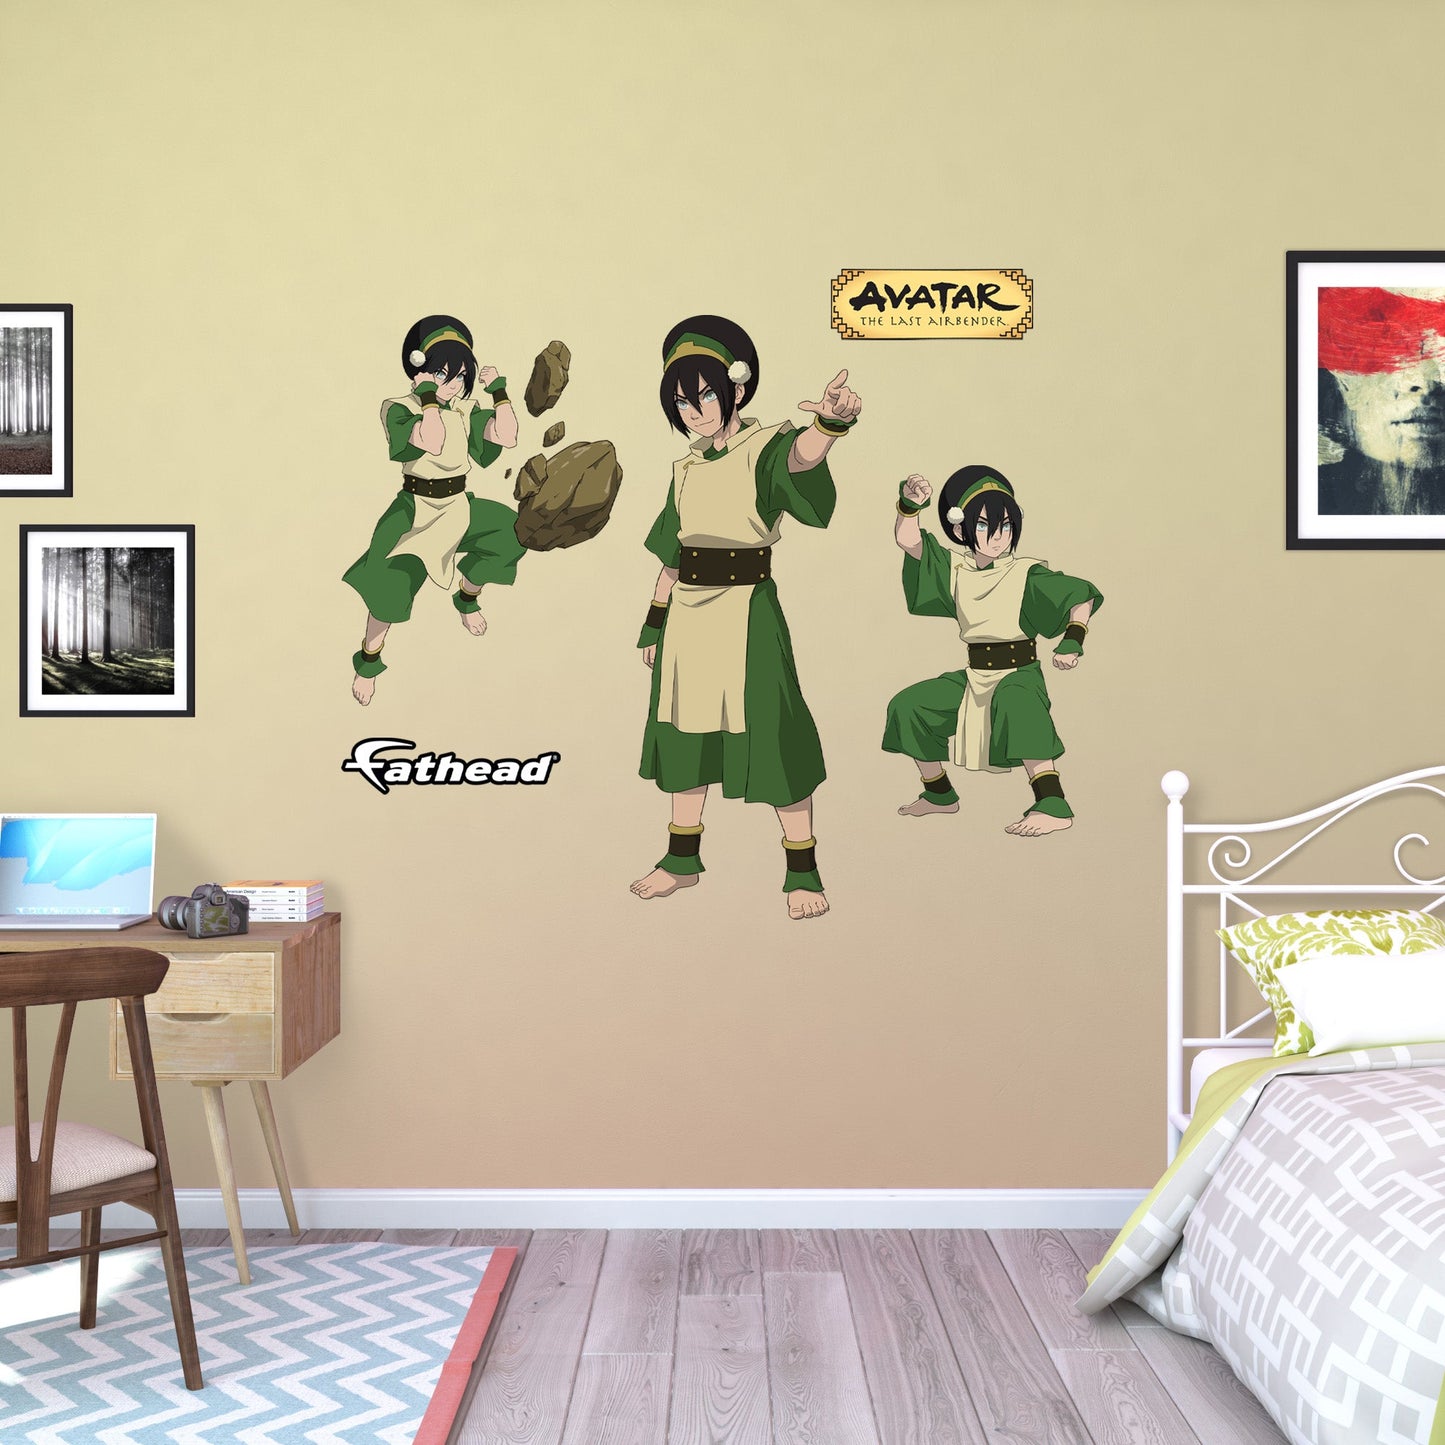 Avatar The Last Airbender: Toph RealBigs        - Officially Licensed Nickelodeon Removable     Adhesive Decal